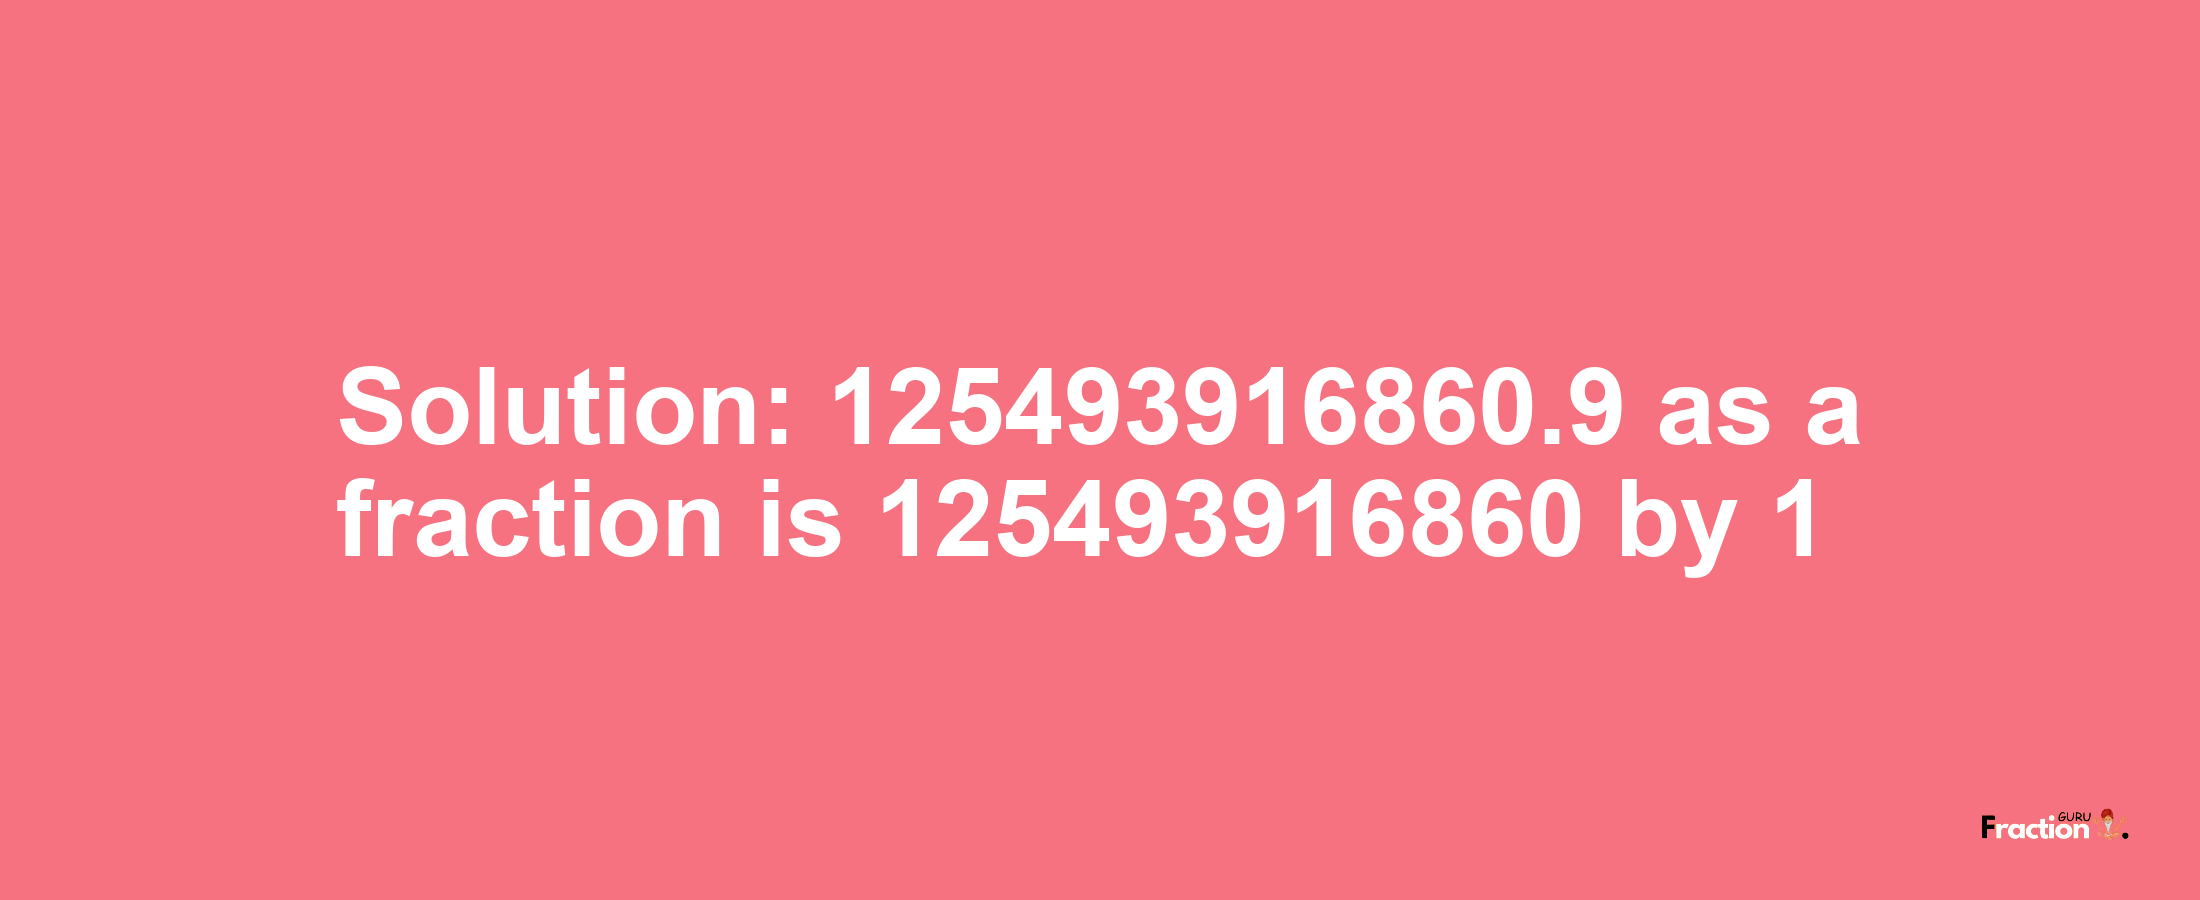 Solution:125493916860.9 as a fraction is 125493916860/1